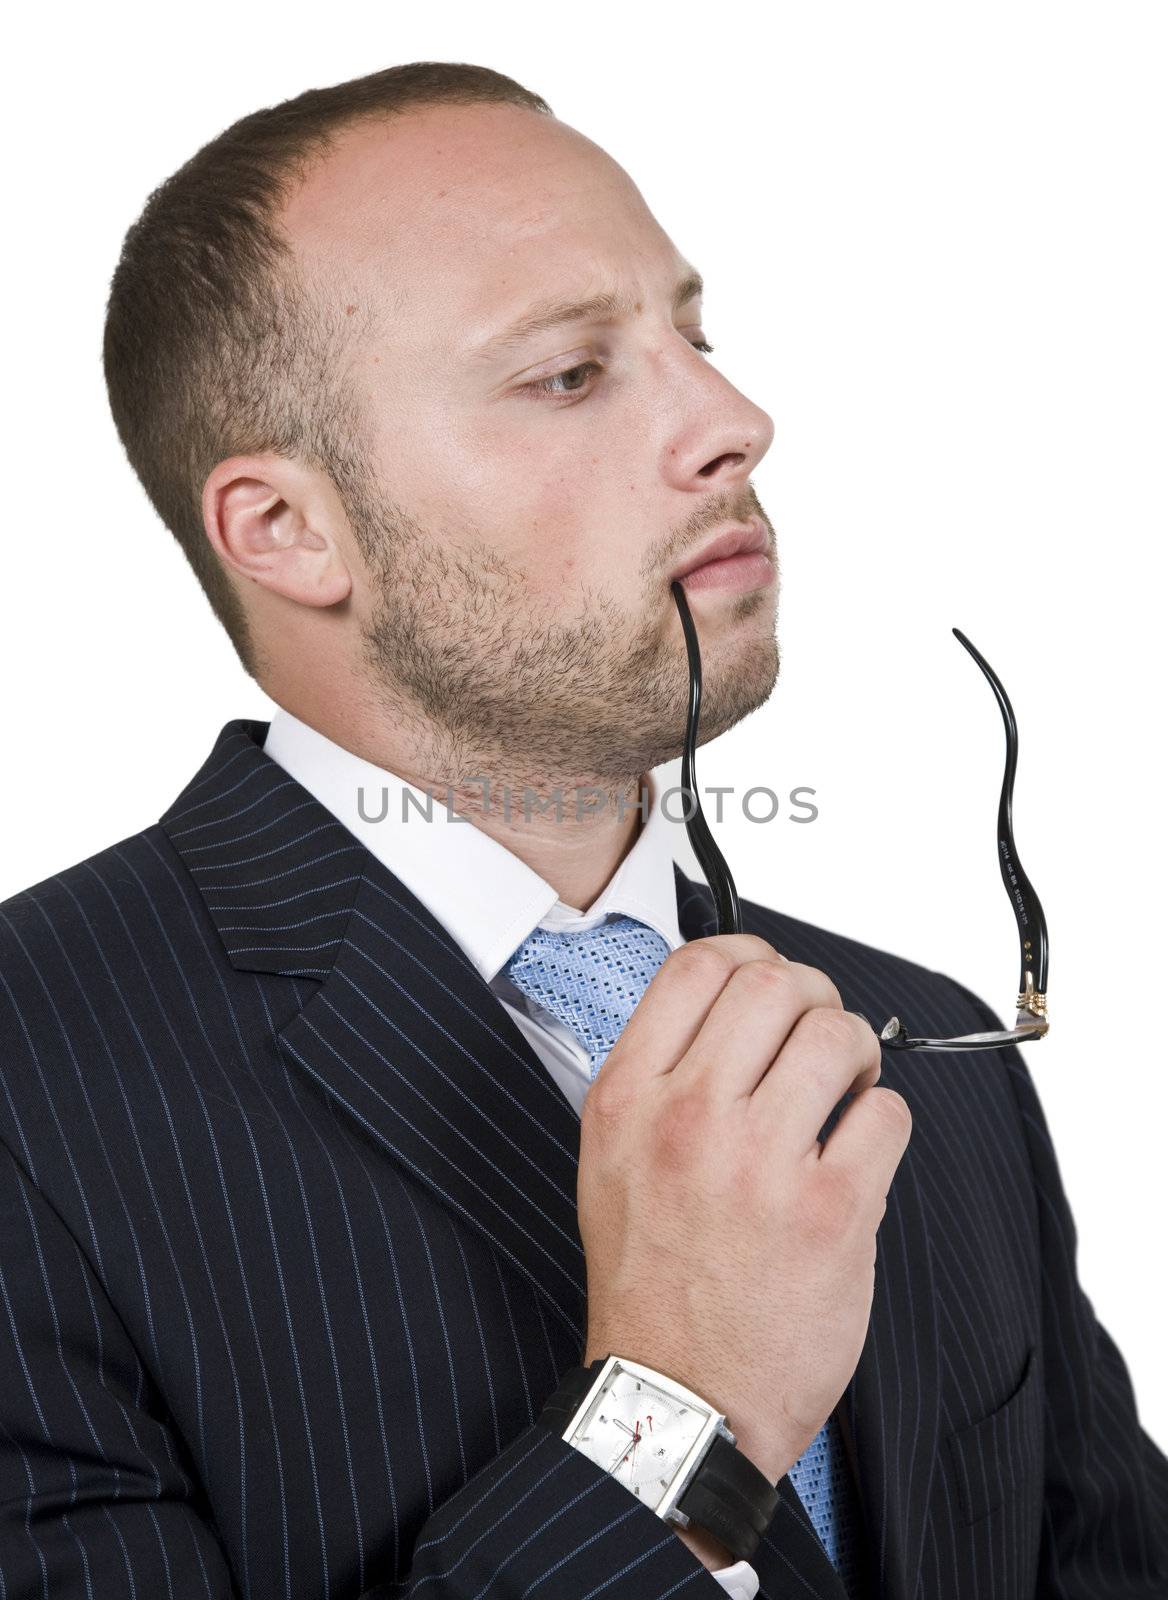 thinking businessman with spectacle on isolated background

